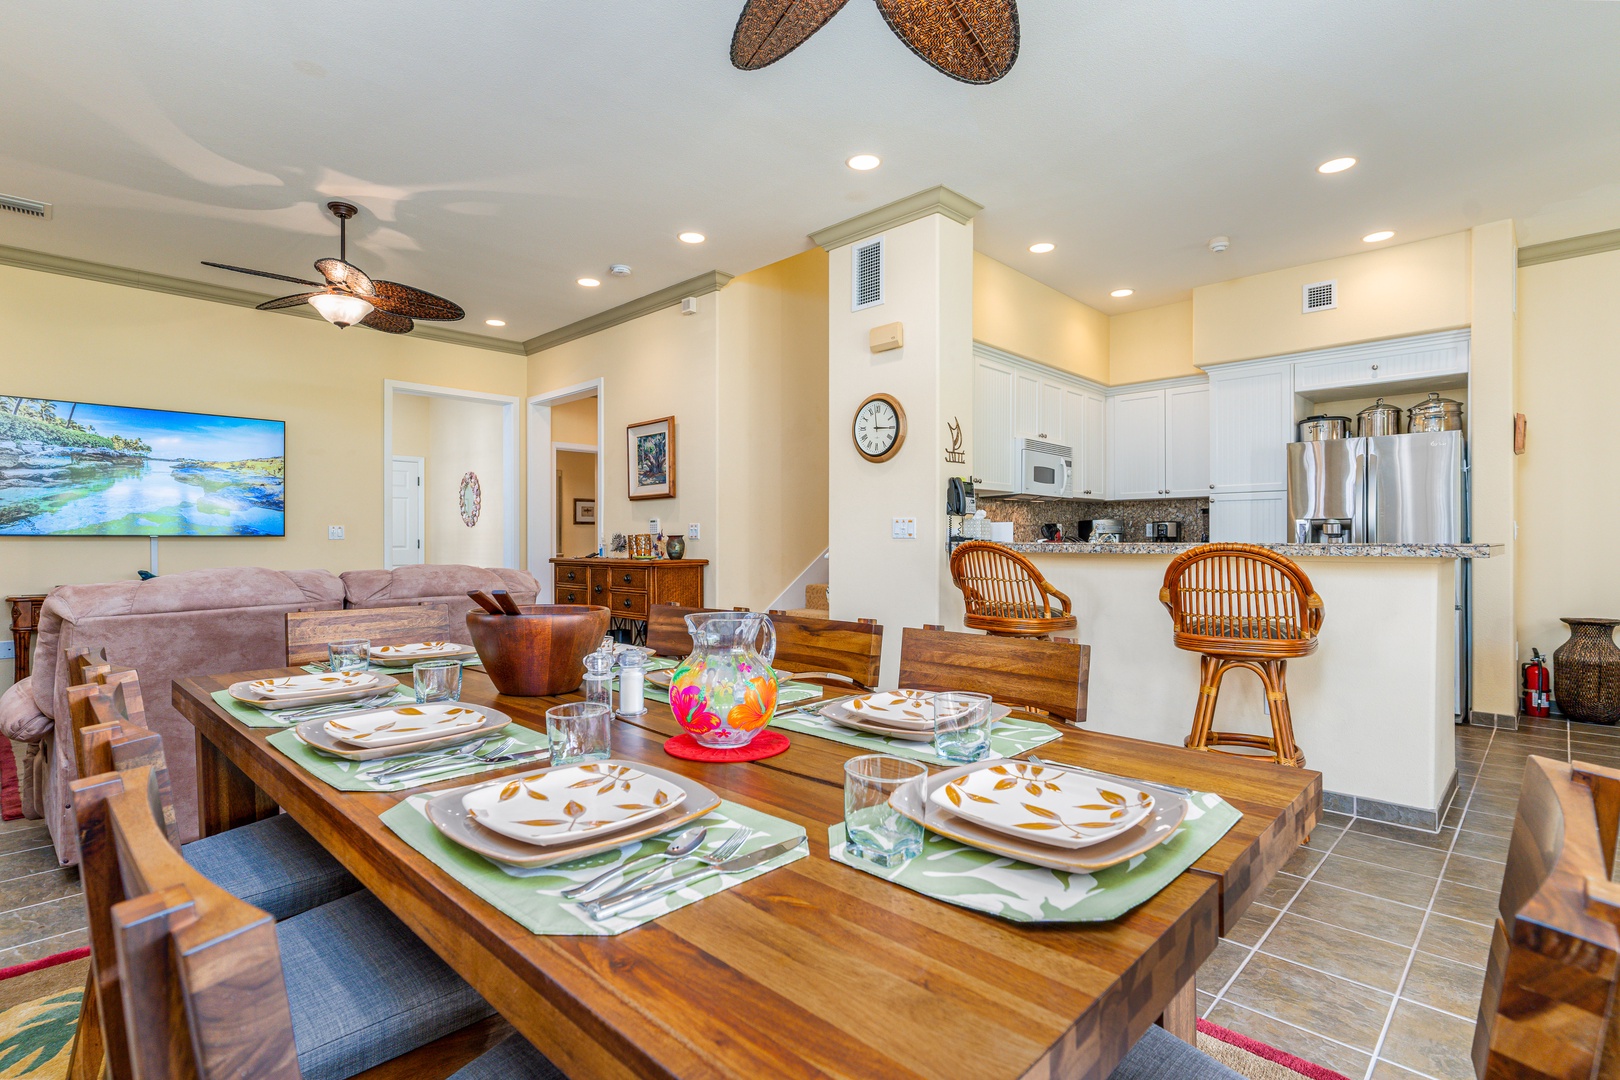 Kapolei Vacation Rentals, Coconut Plantation 1100-2 - Dine on an elegant meal while conversing with the chef.